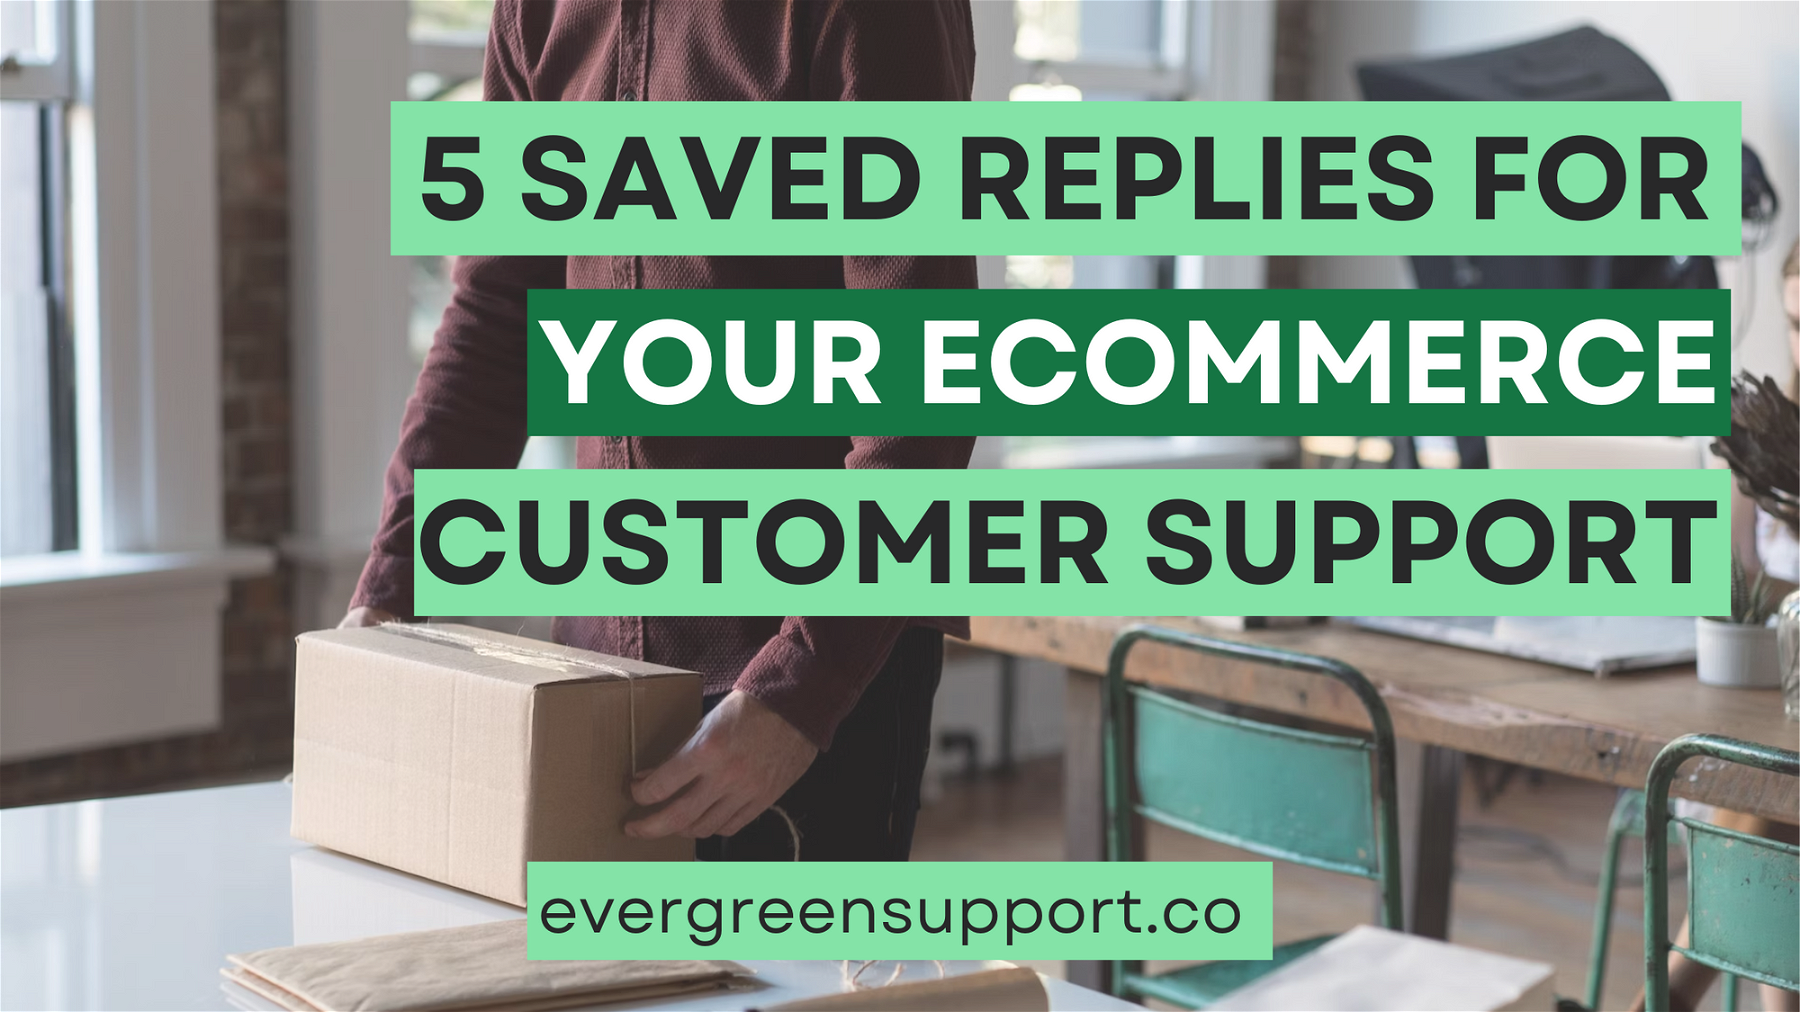 5 Saved Replies For Your Ecommerce Customer Support